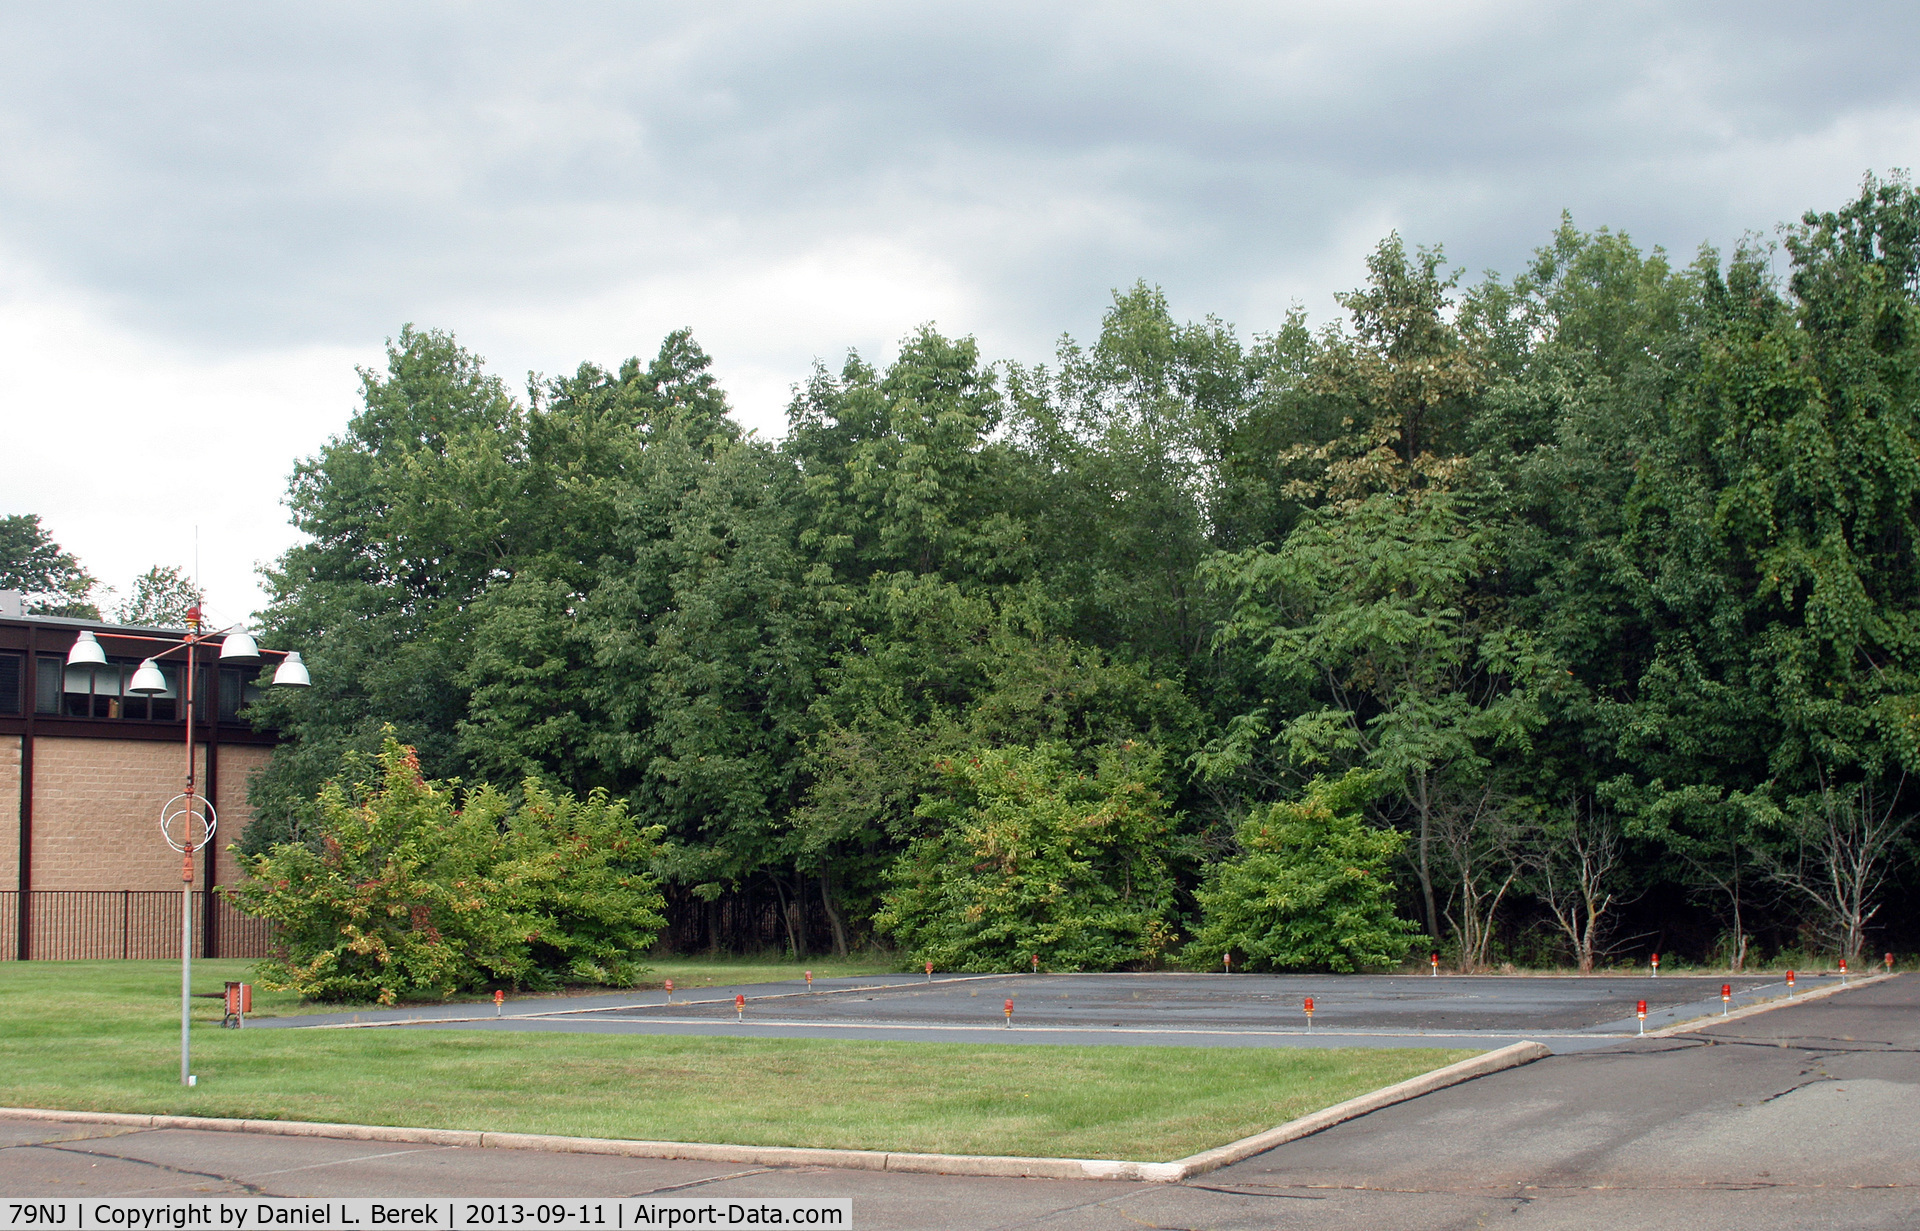 Philips Lighting Co Heliport (79NJ) - This little heliport is located in an industrial park in Franklin Township, NJ.